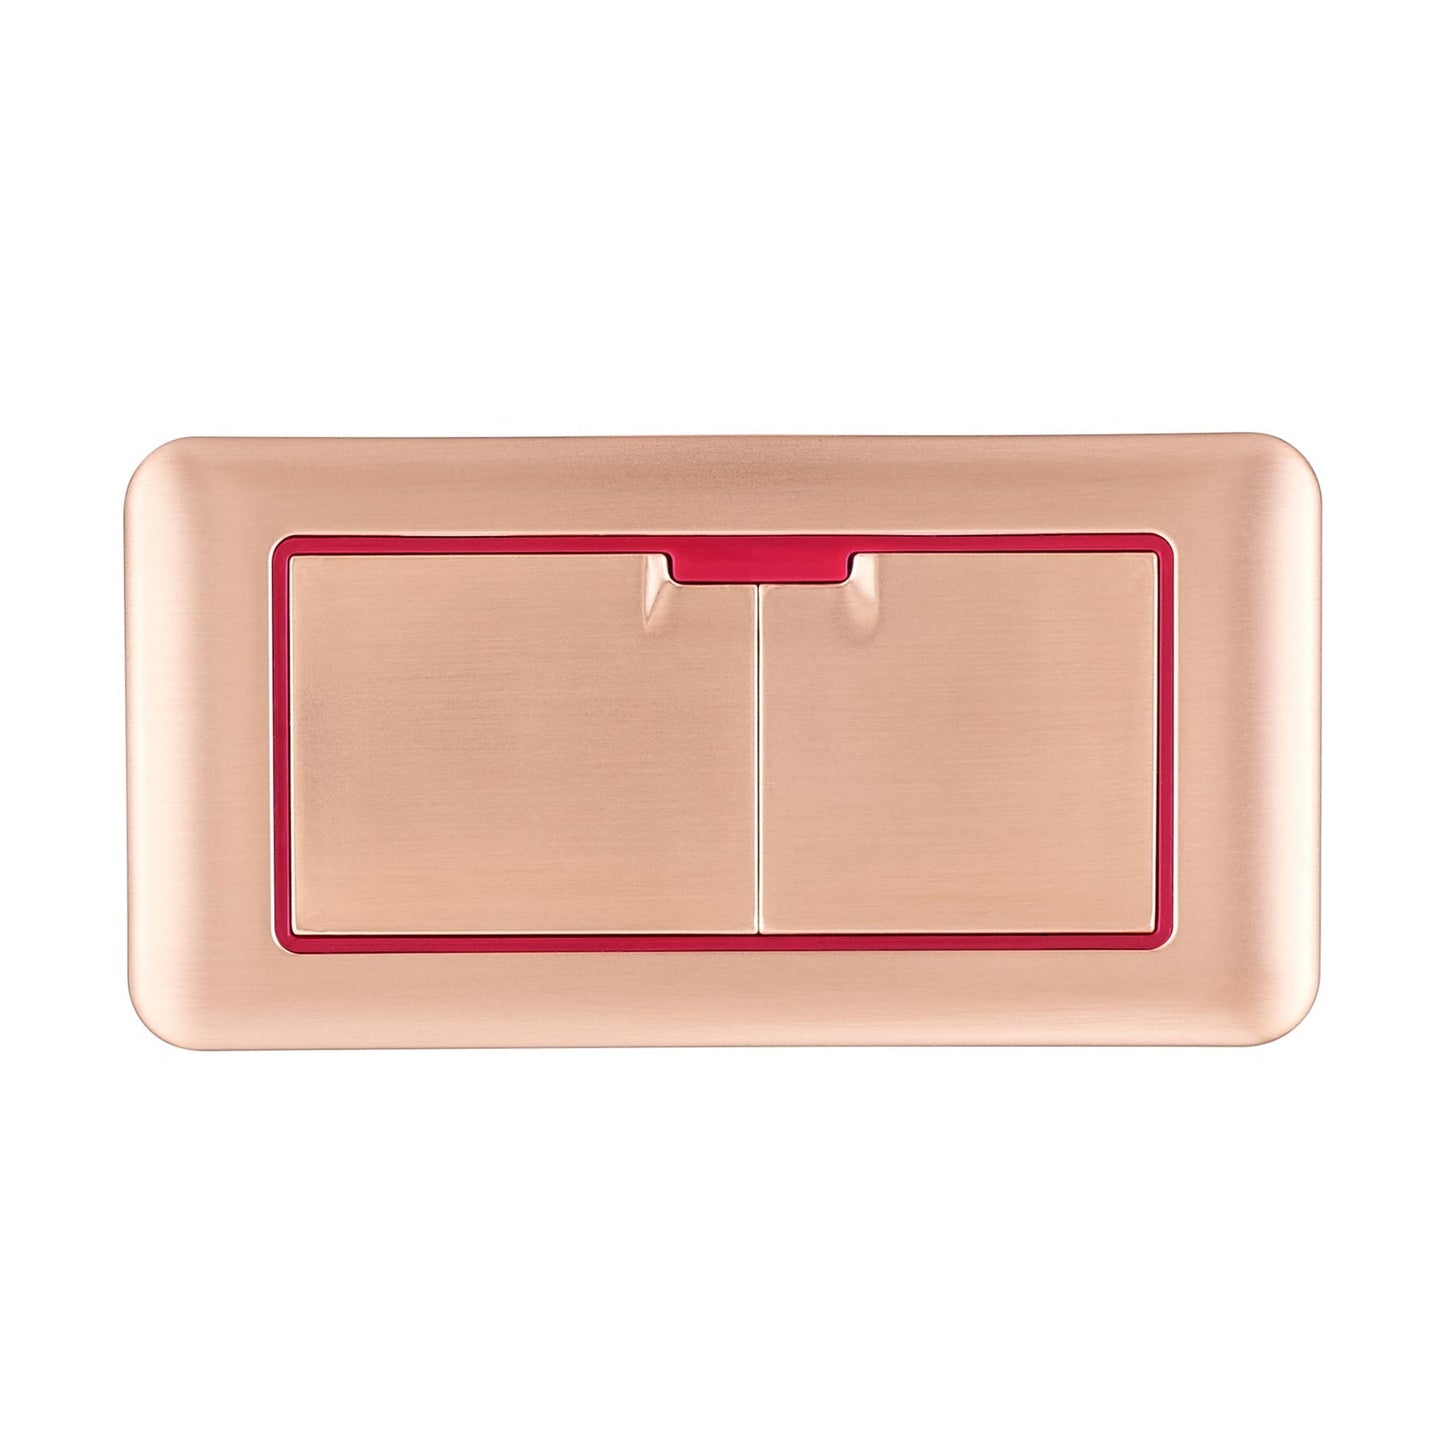 Swiss Madison Rectangular Rose Gold Toilet Push Buttons With QQ Feet